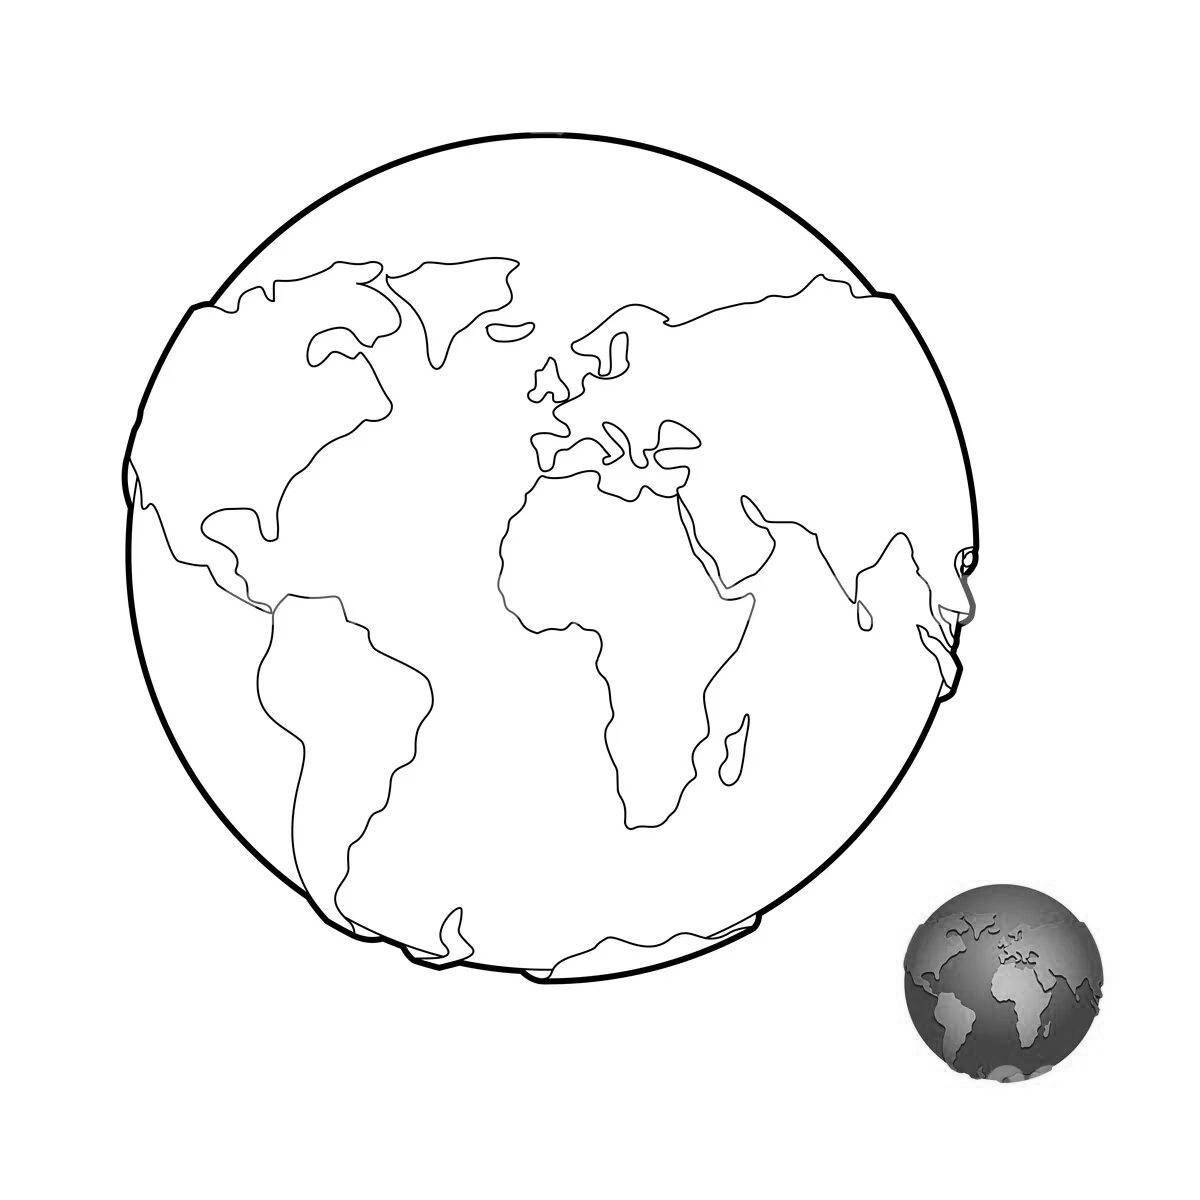 Live globe coloring book for kids